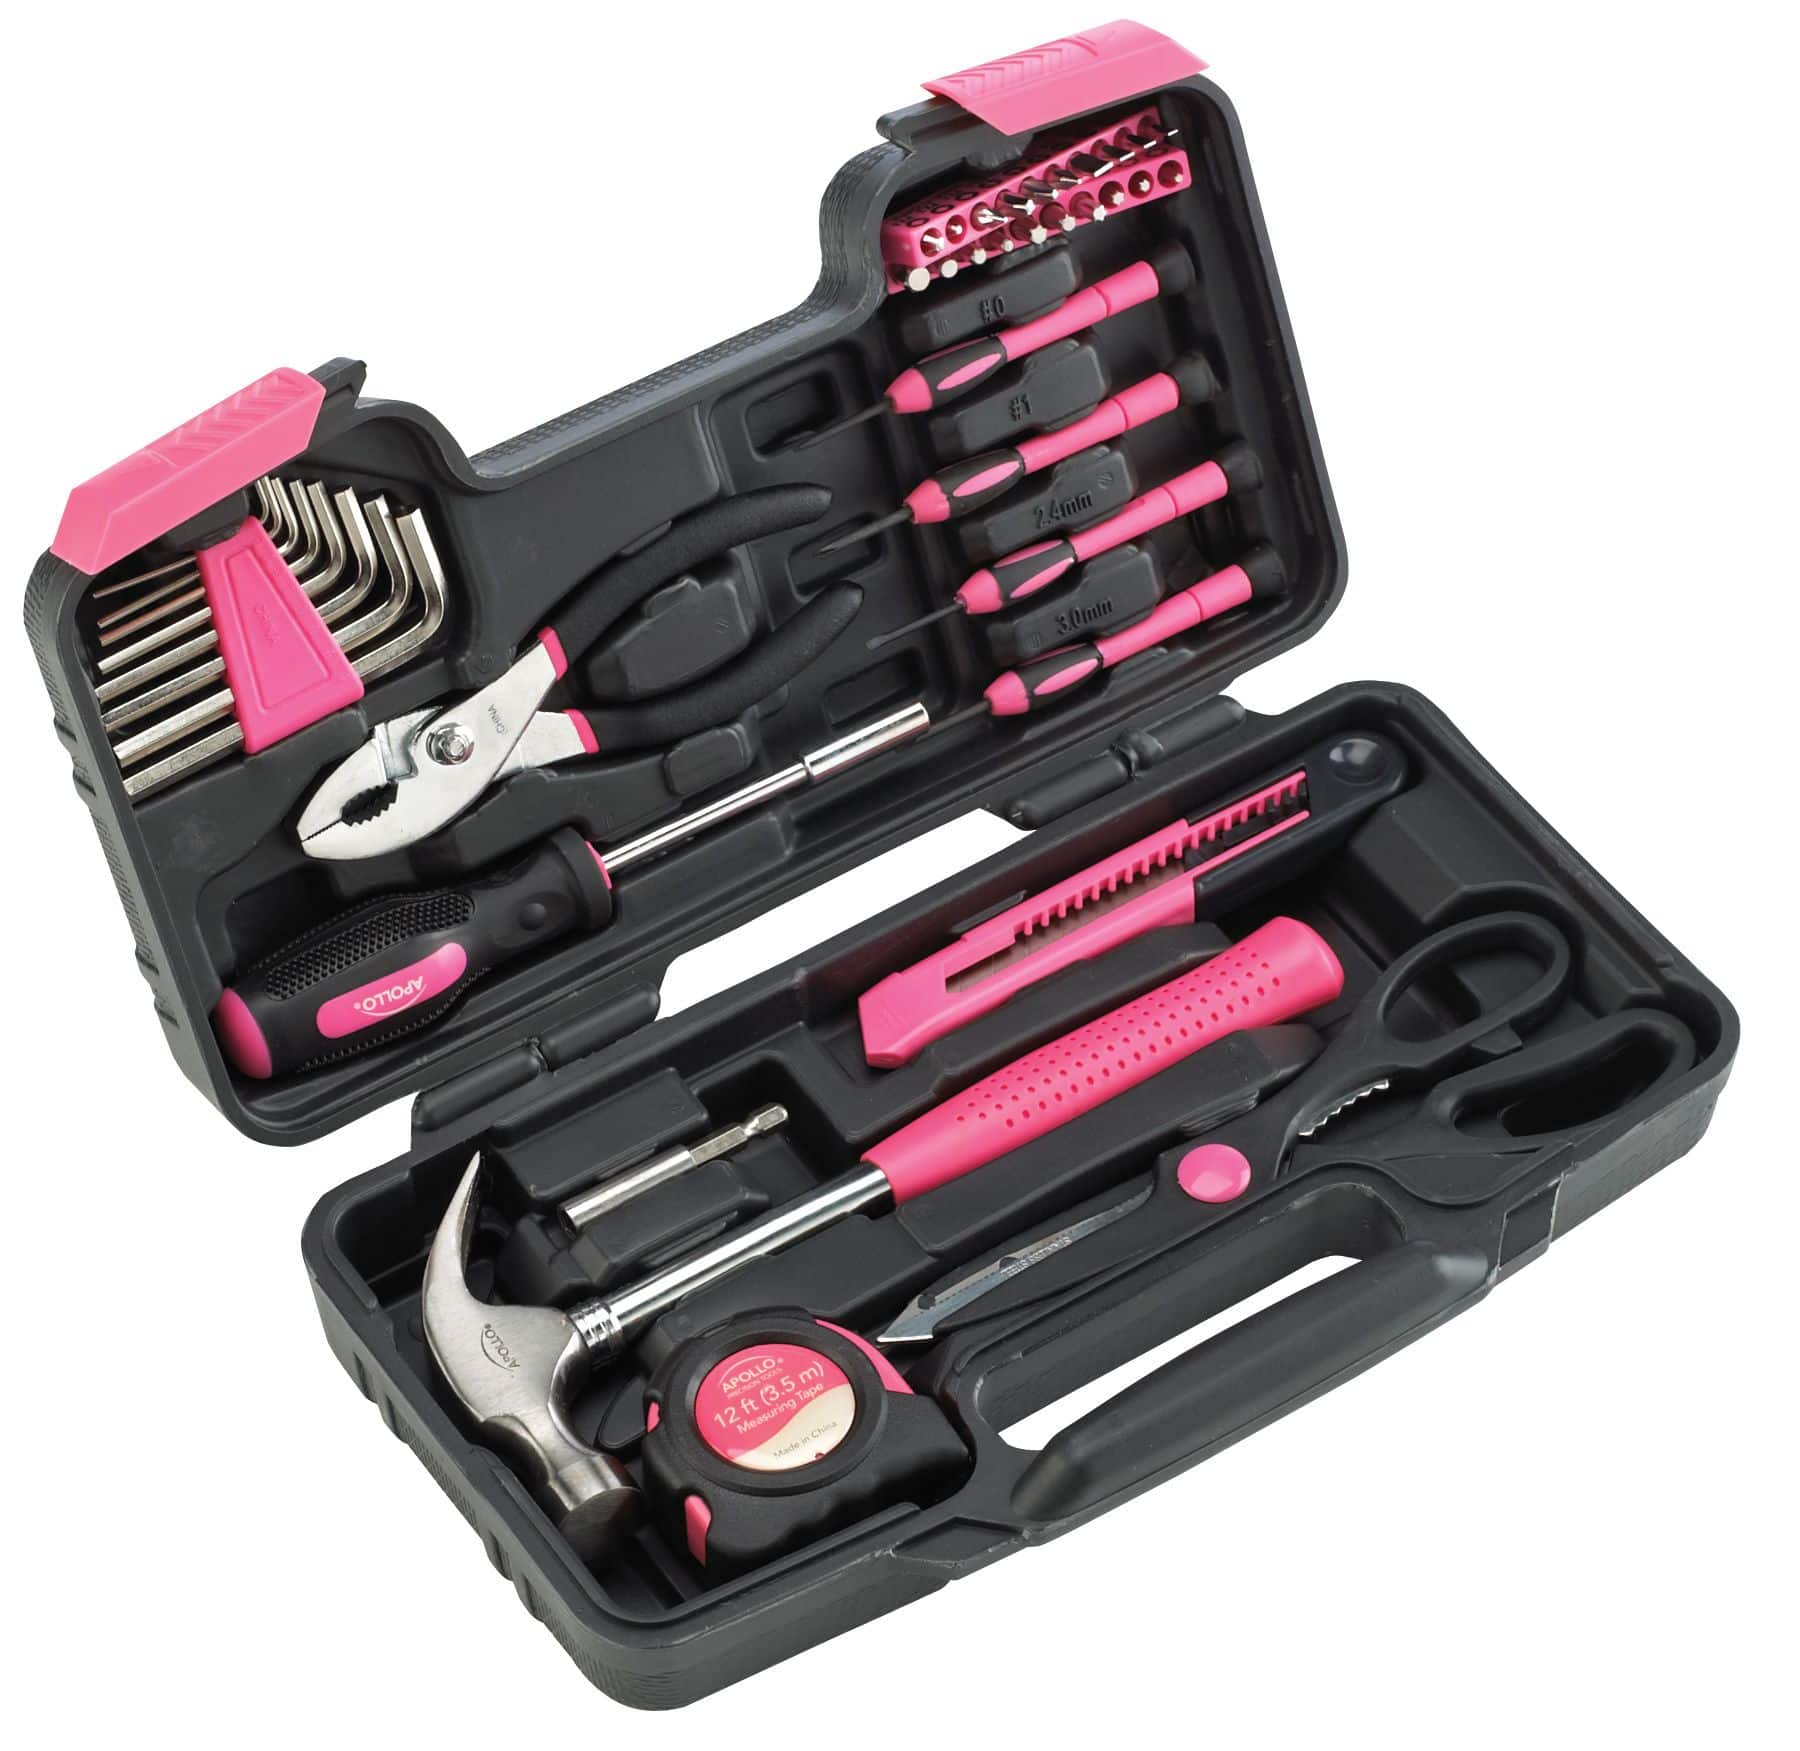 https://media-www.canadiantire.ca/product/fixing/tools/sockets-wrenches/0581204/apollo-39pc-pink-toolkit-rethink-breast-cancer-ff36a525-9e32-47a8-81df-98bbb562b0a0-jpgrendition.jpg